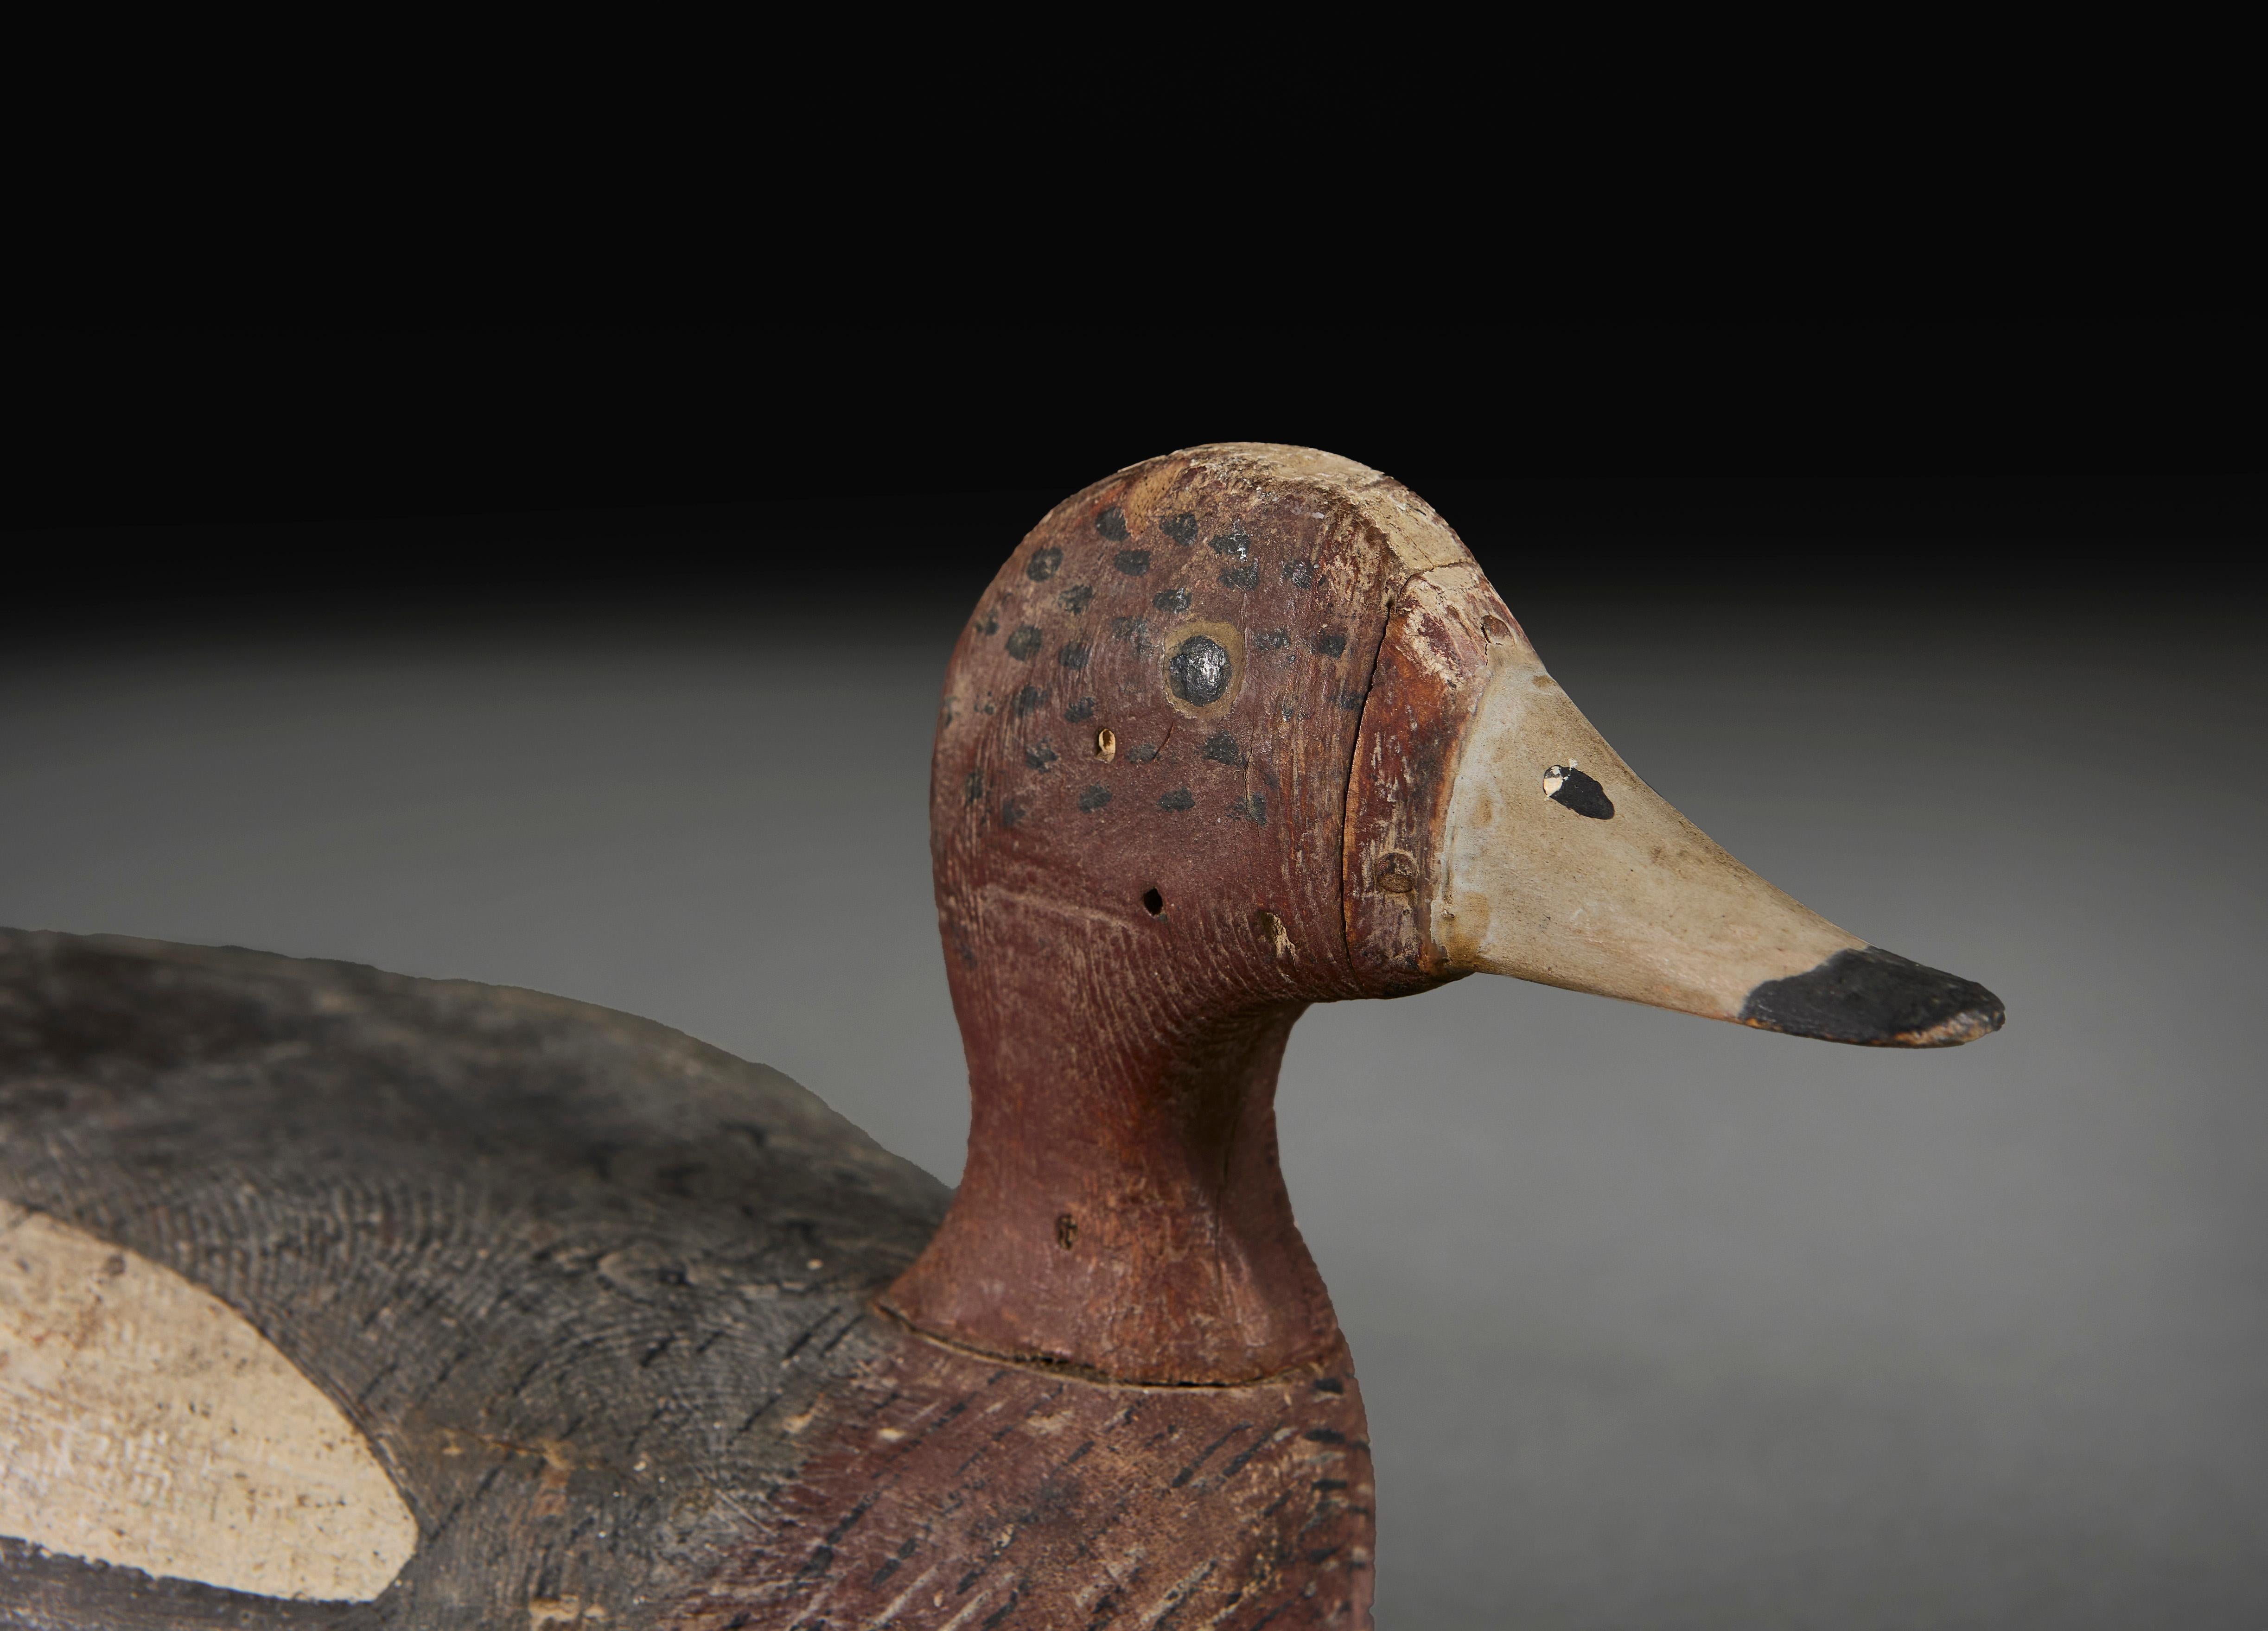 England, circa 1900

An English folk art wooden decoy duck, with original paintwork in red umber and charcoal grey.

Height  15.00cm
Width   35.00cm
Depth   15.00cm